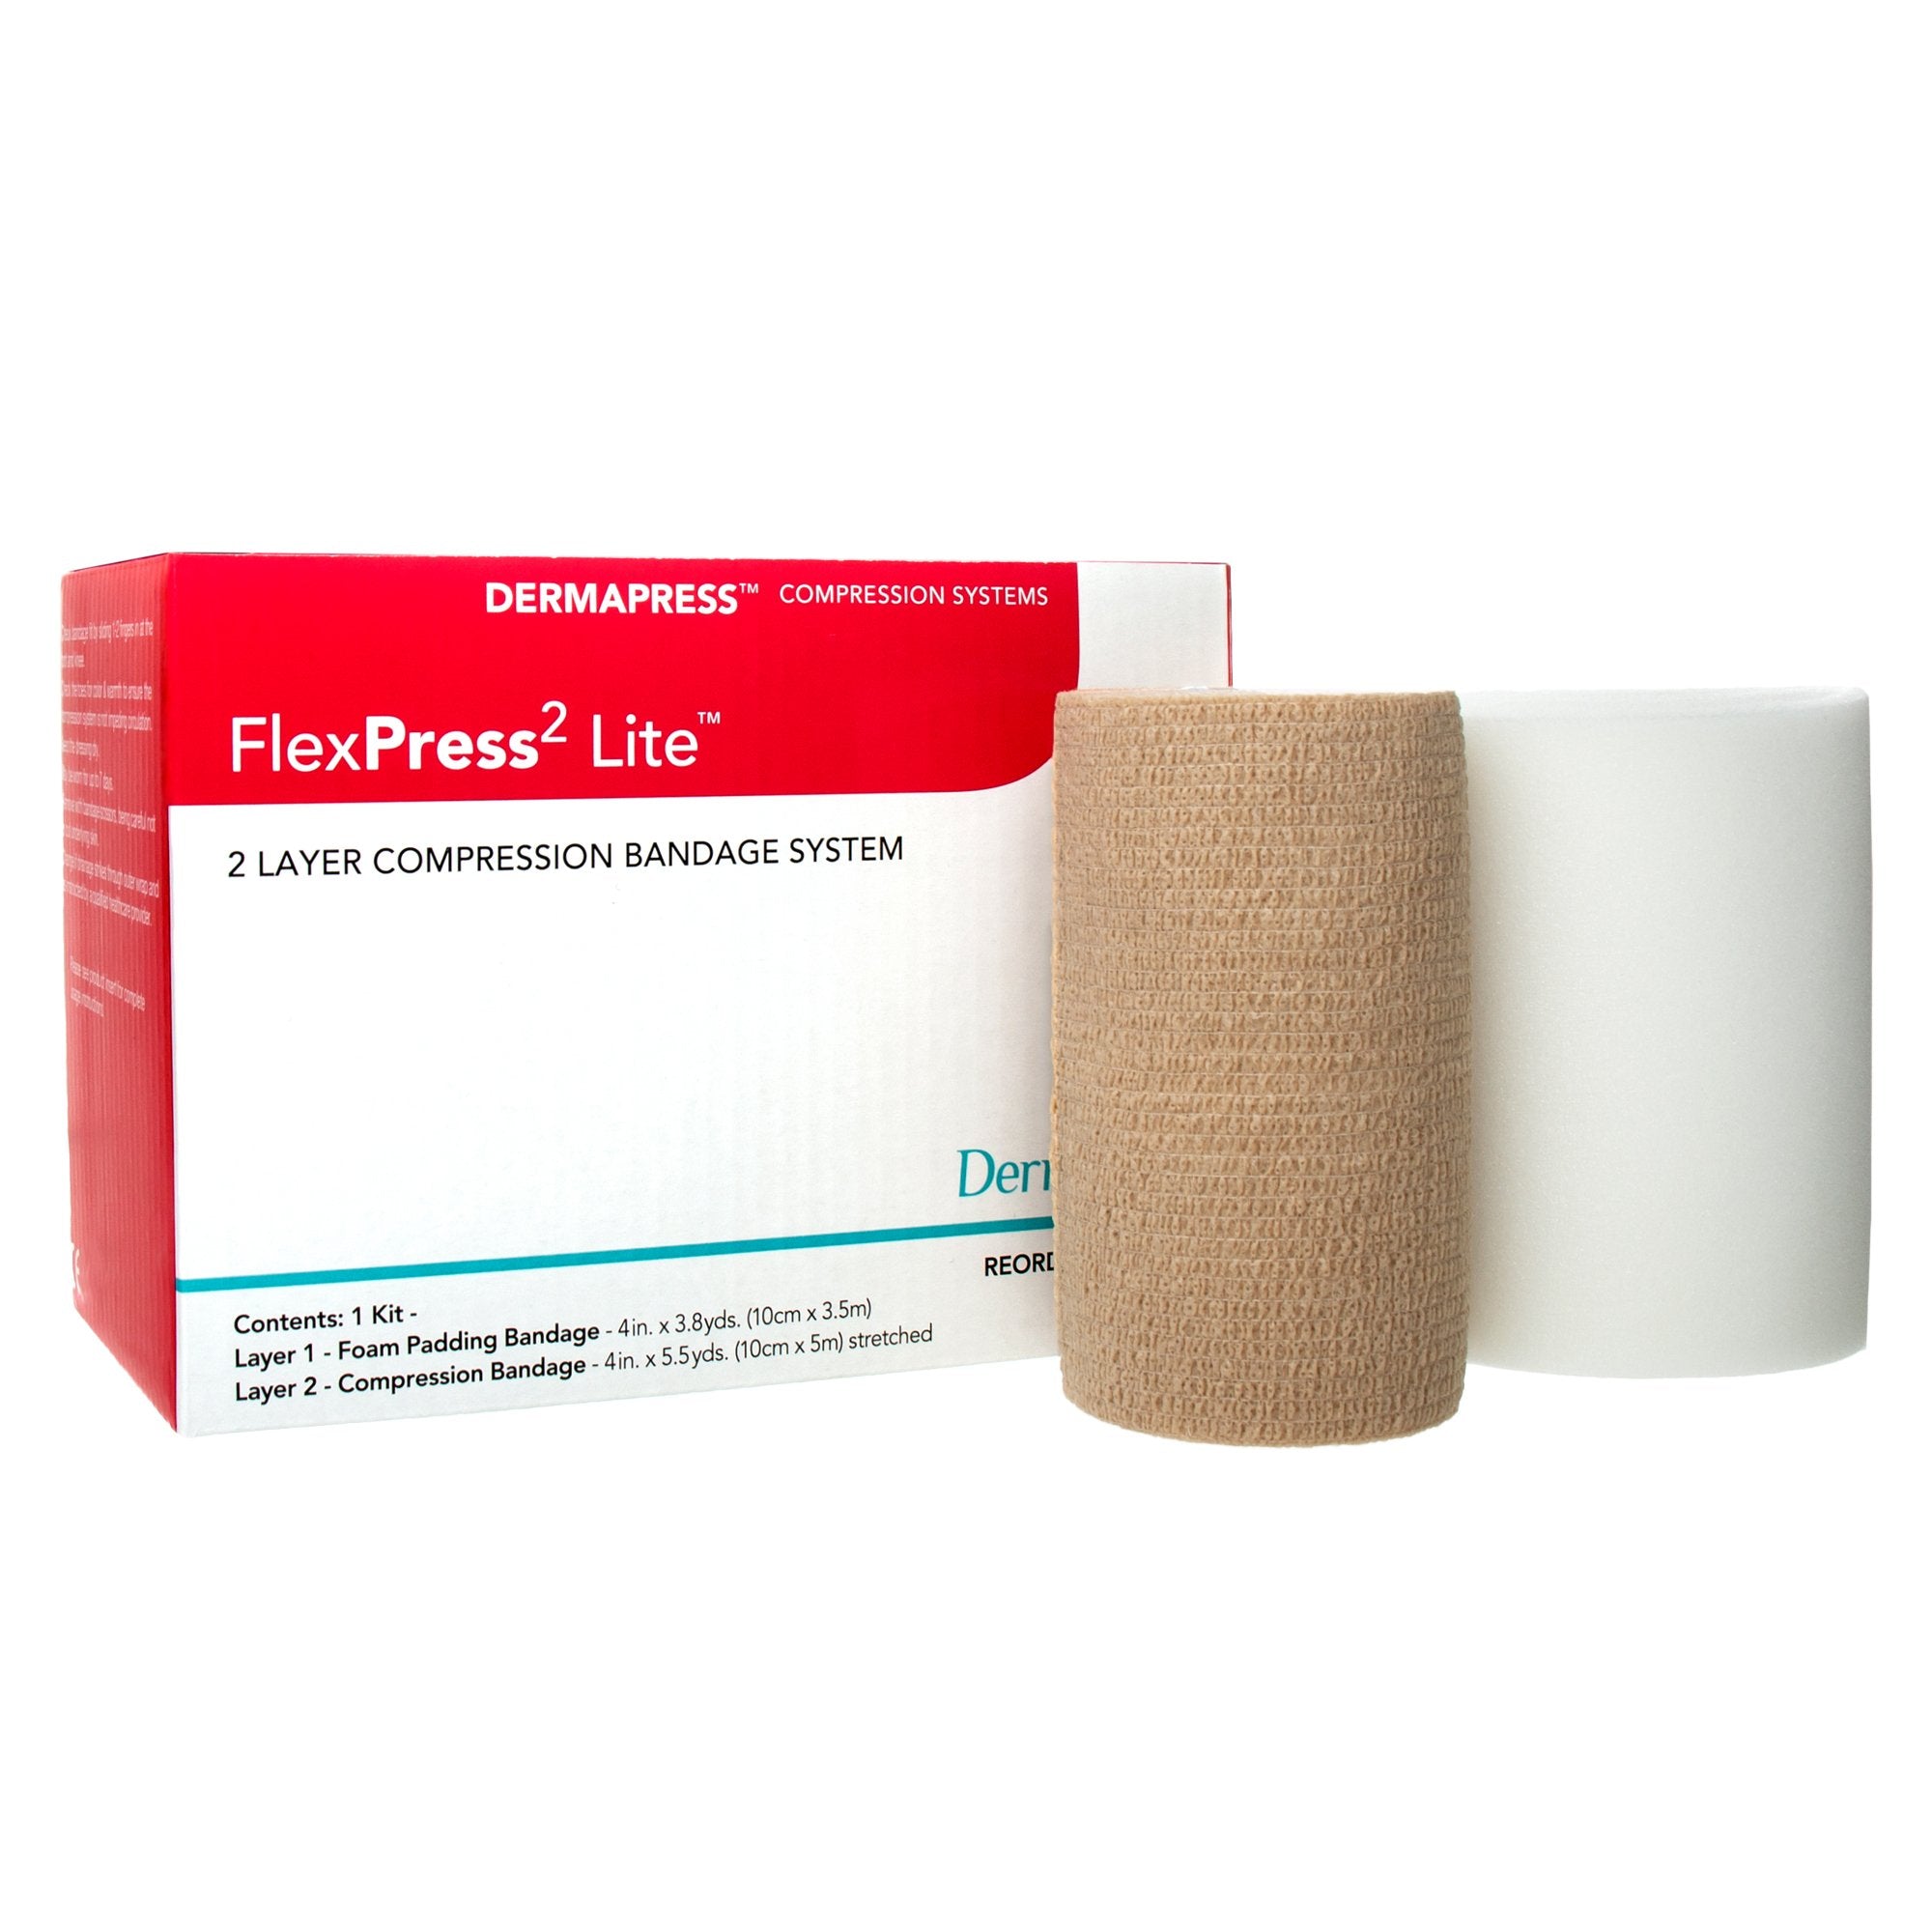 2 Layer Compression Bandage System FlexPress2 Lite 4 Inch X 3-4/5 Yard / 4 Inch X 5-1/2 Yard Standard Compression Self-adherent Closure Tan / White NonSterile